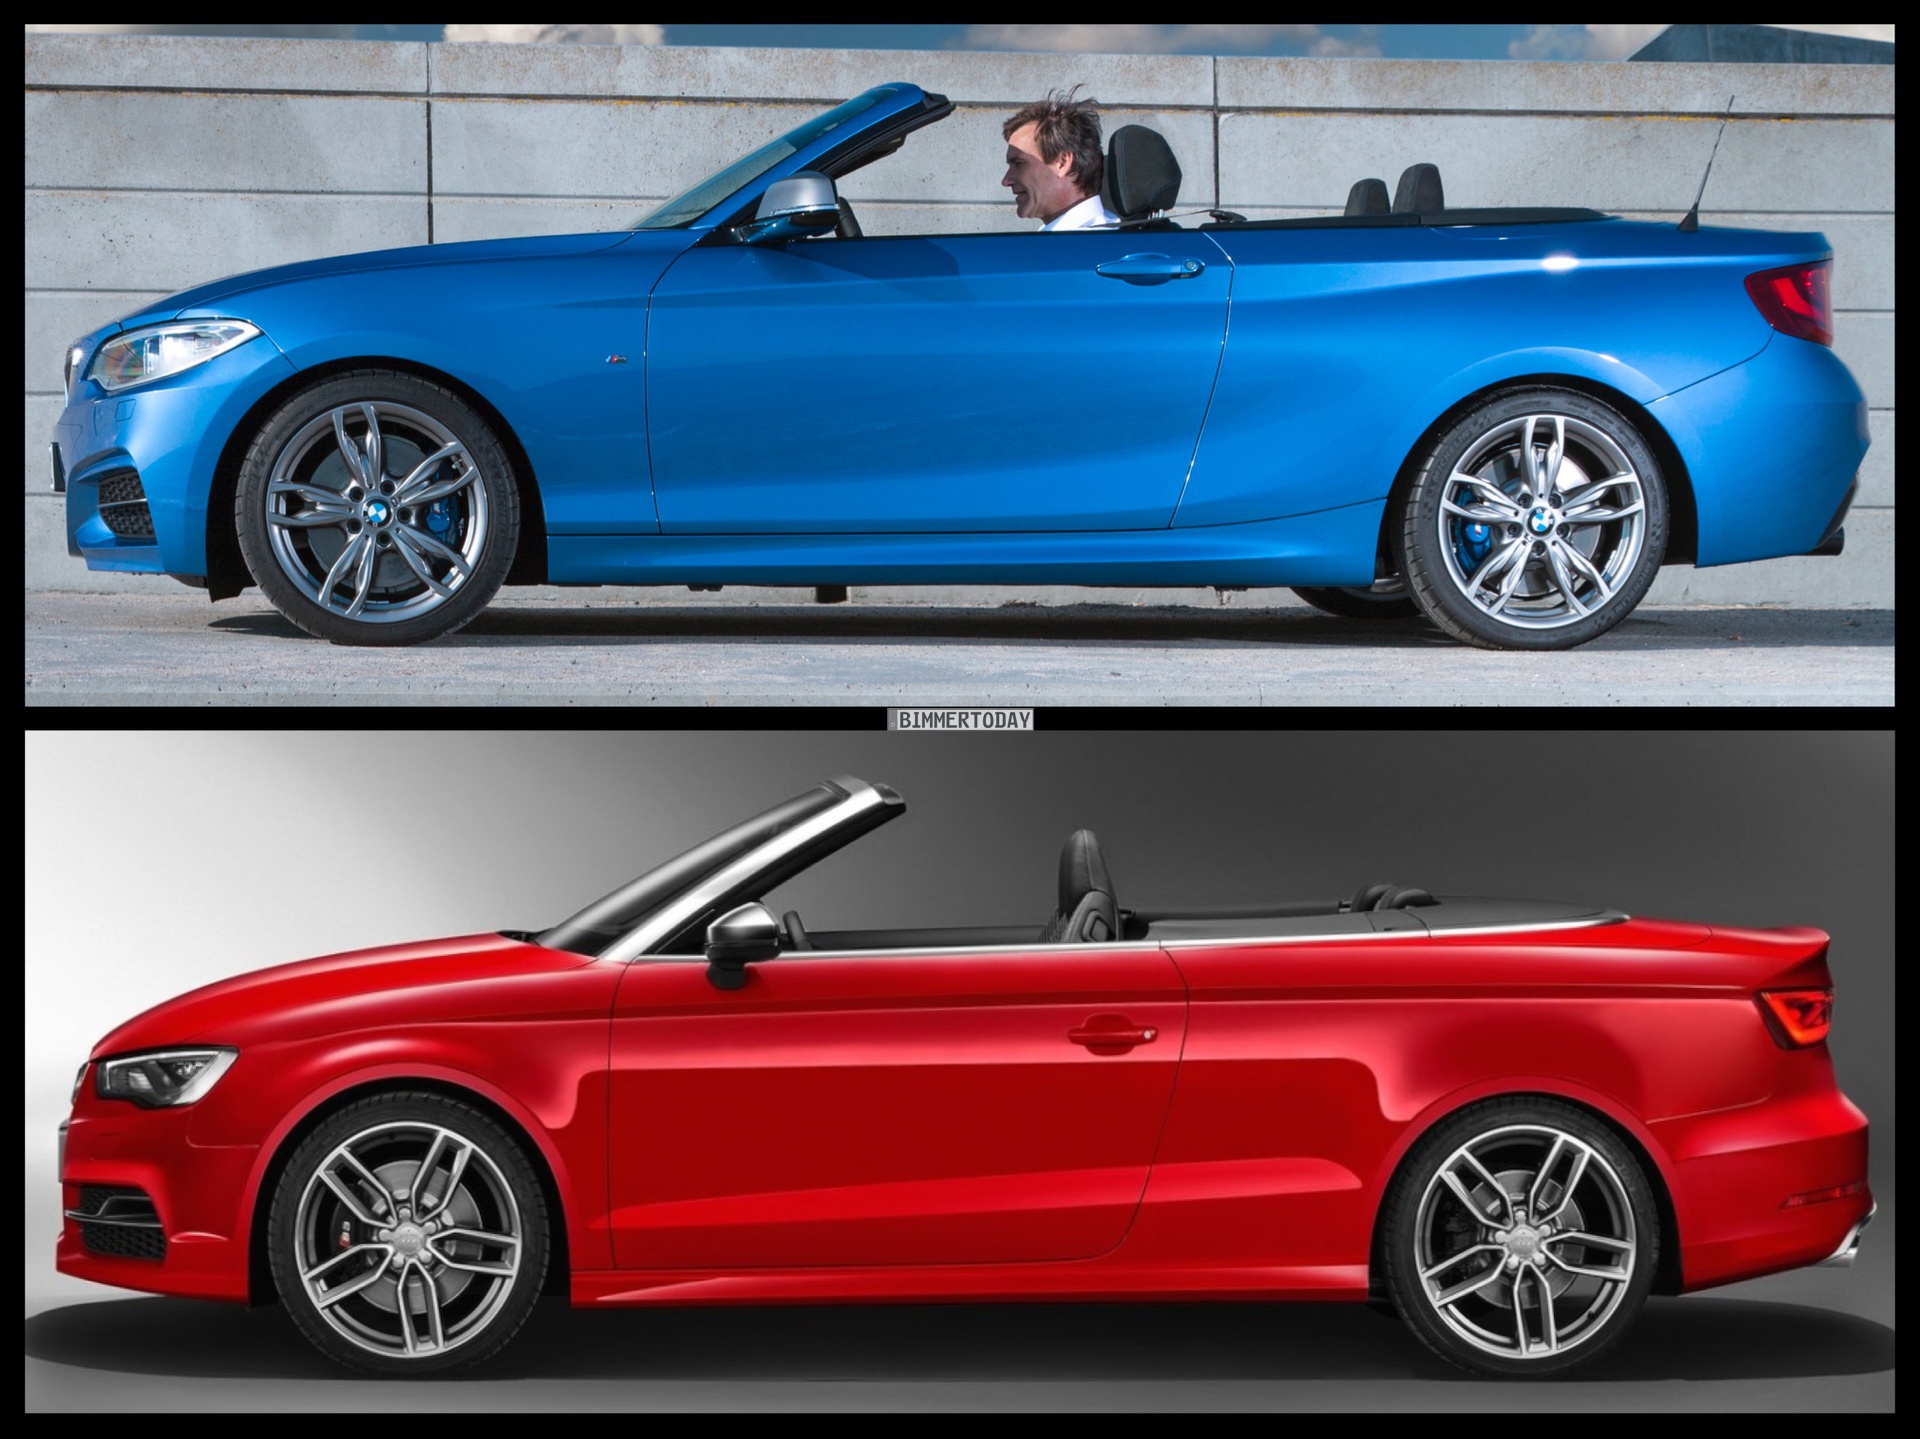 Audi a3 or bmw 1 series convertible #4